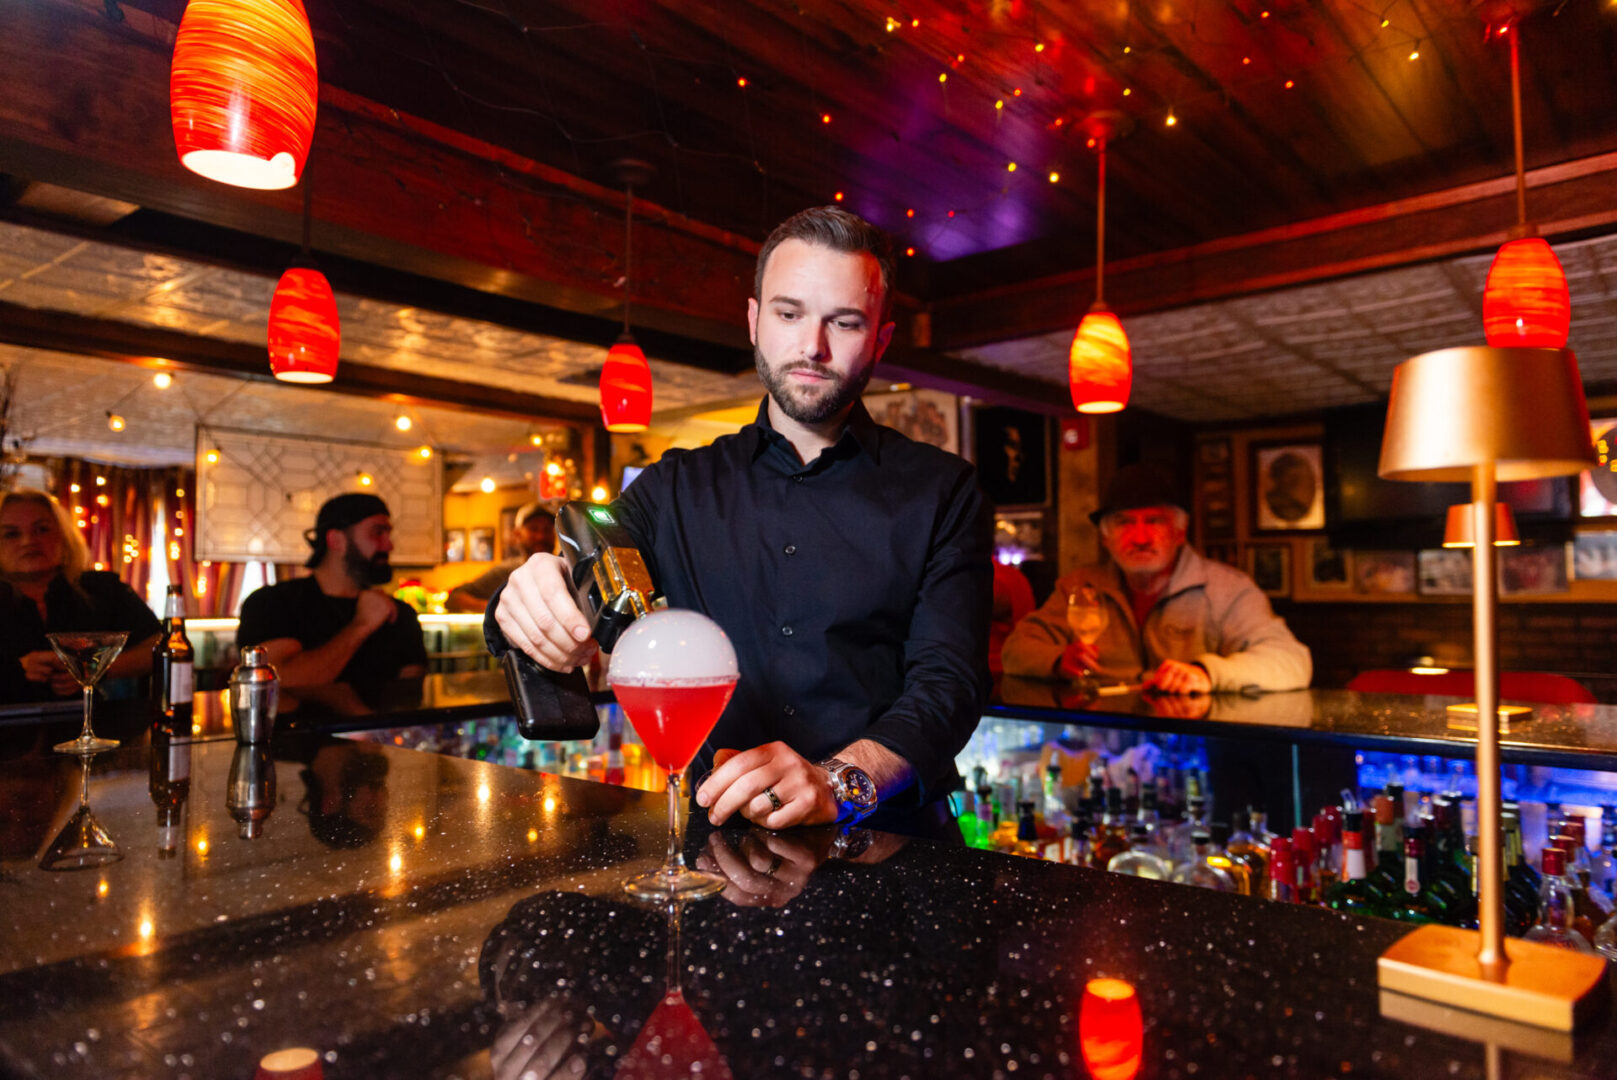 A man making a drink wearing black dress on the bar counter